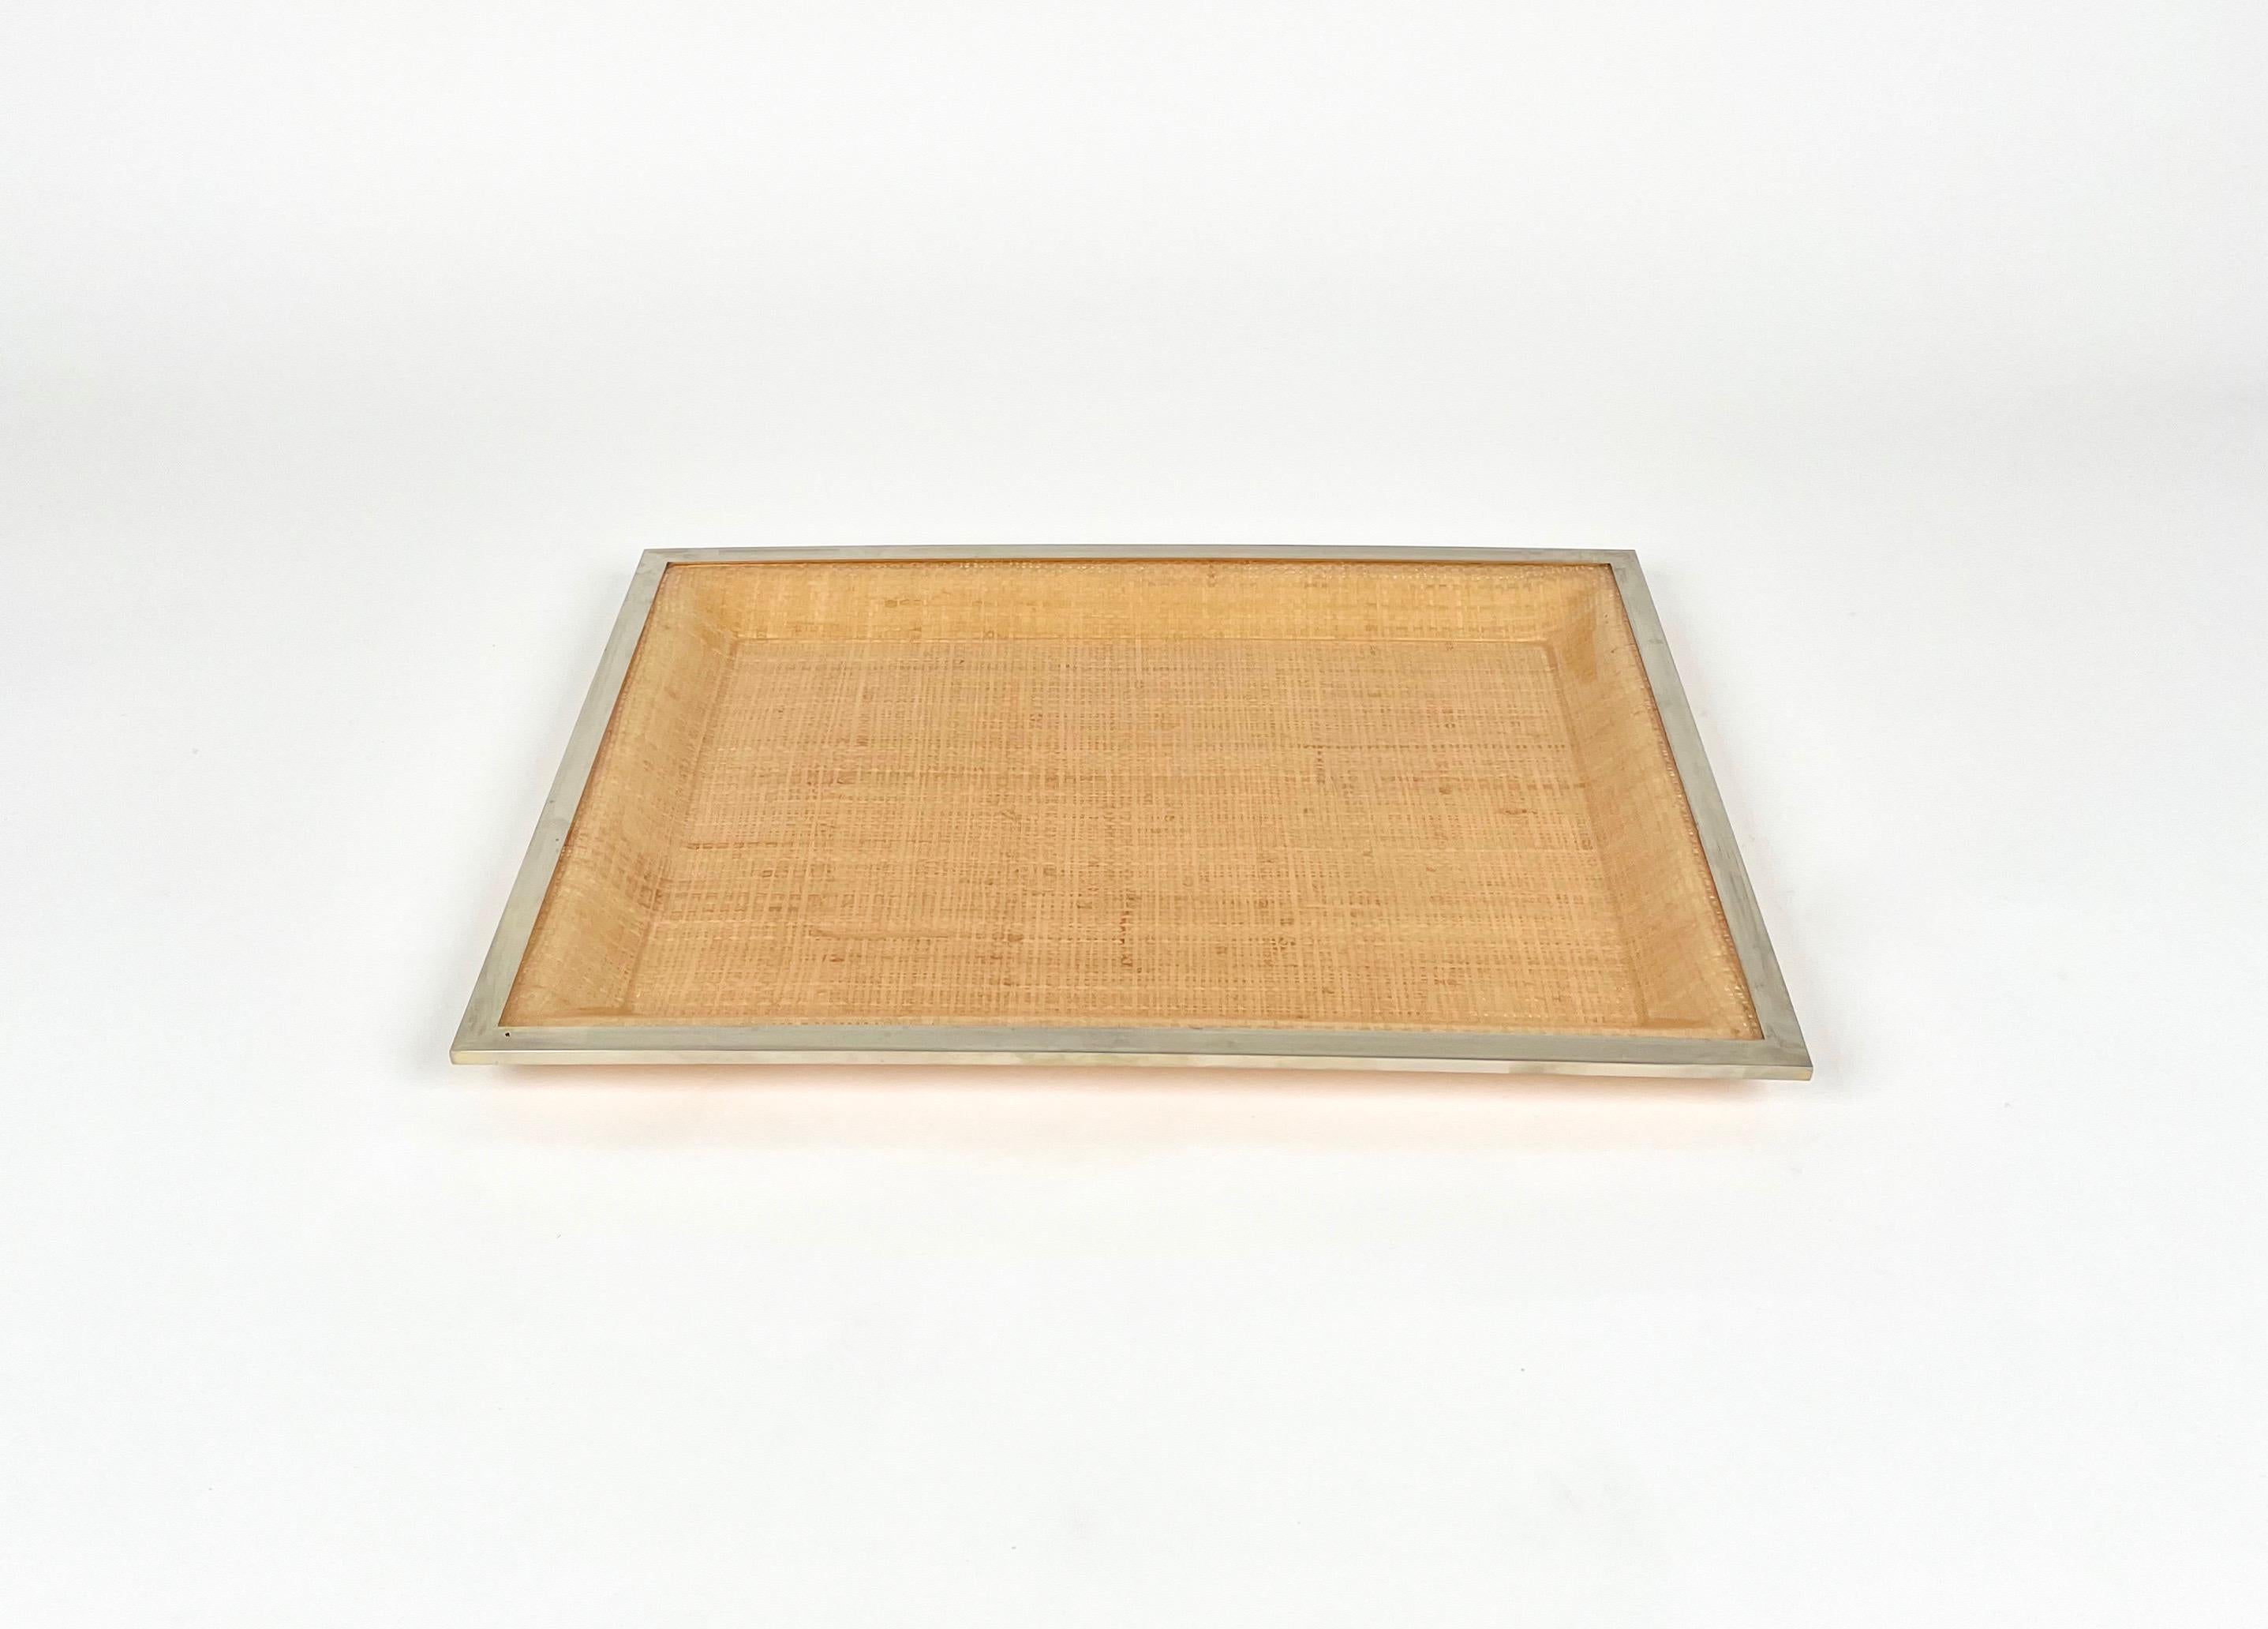 Rectangular serving tray centerpiece in wicker and lucite with chrome borders in the style of Christian Dior. 

Great accessory for any modern interior. 

Made in Italy in the 1970s.
 